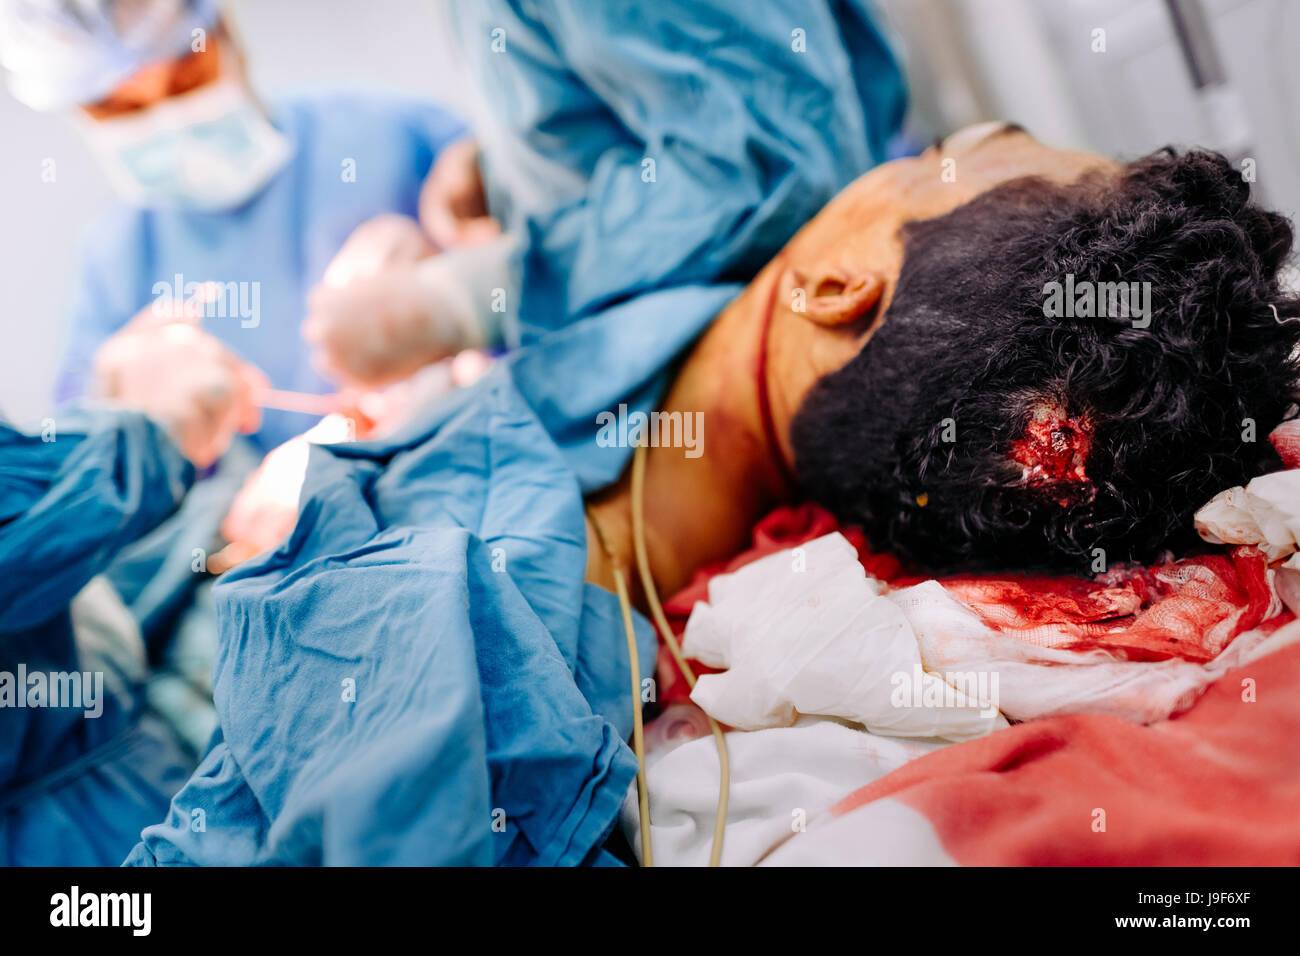 A young gang member, with a gunshot wound to the head, lies on the strecher during the life-saving surgery in the operating room of a public hospital in San Salvador, El Salvador, 16 December 2015. Stock Photo